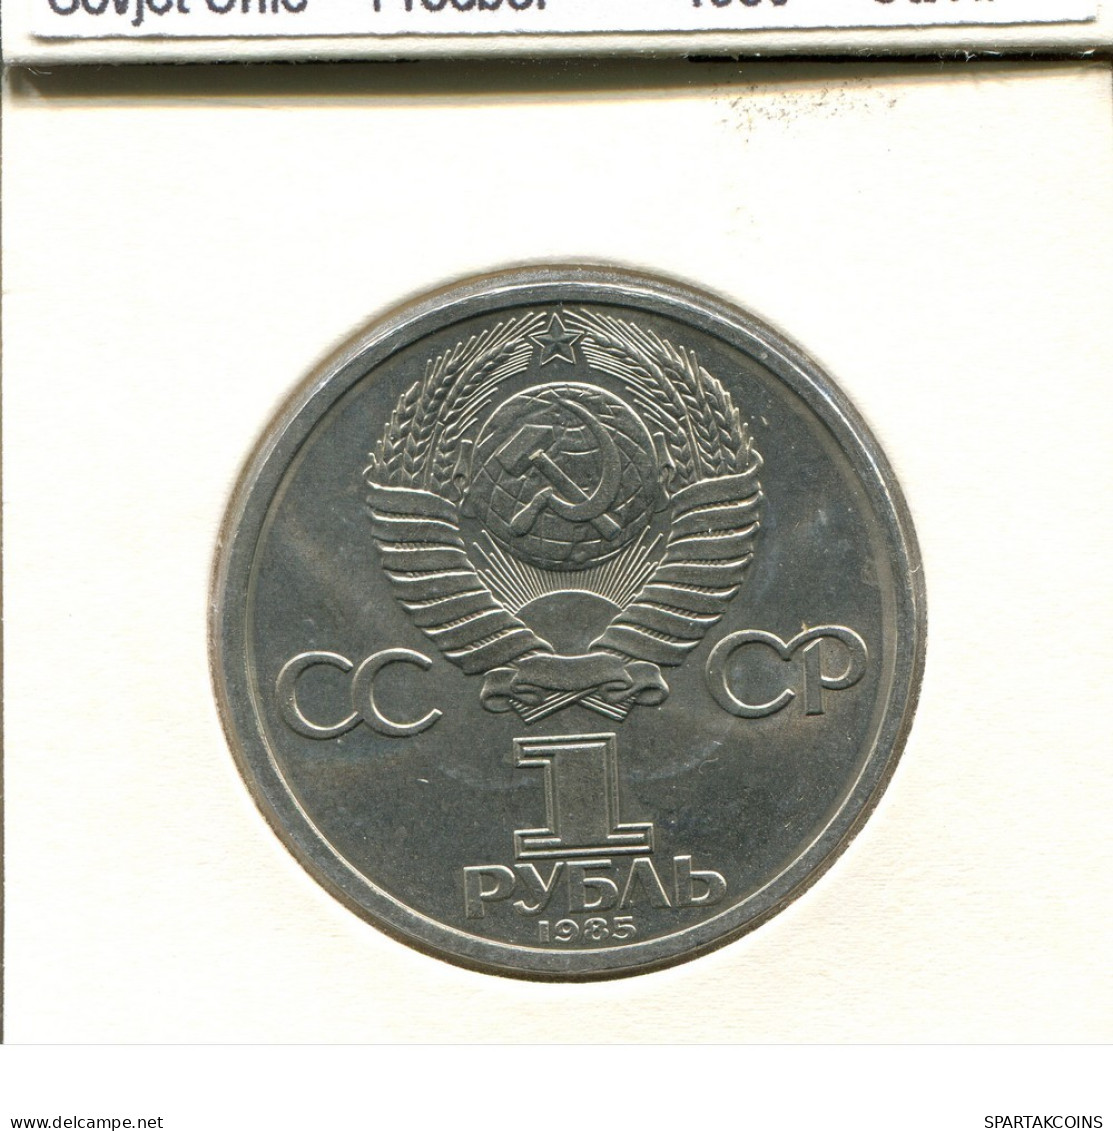 1 ROUBLE 1985 RUSSLAND RUSSIA USSR Münze #AS665.D.A - Russie